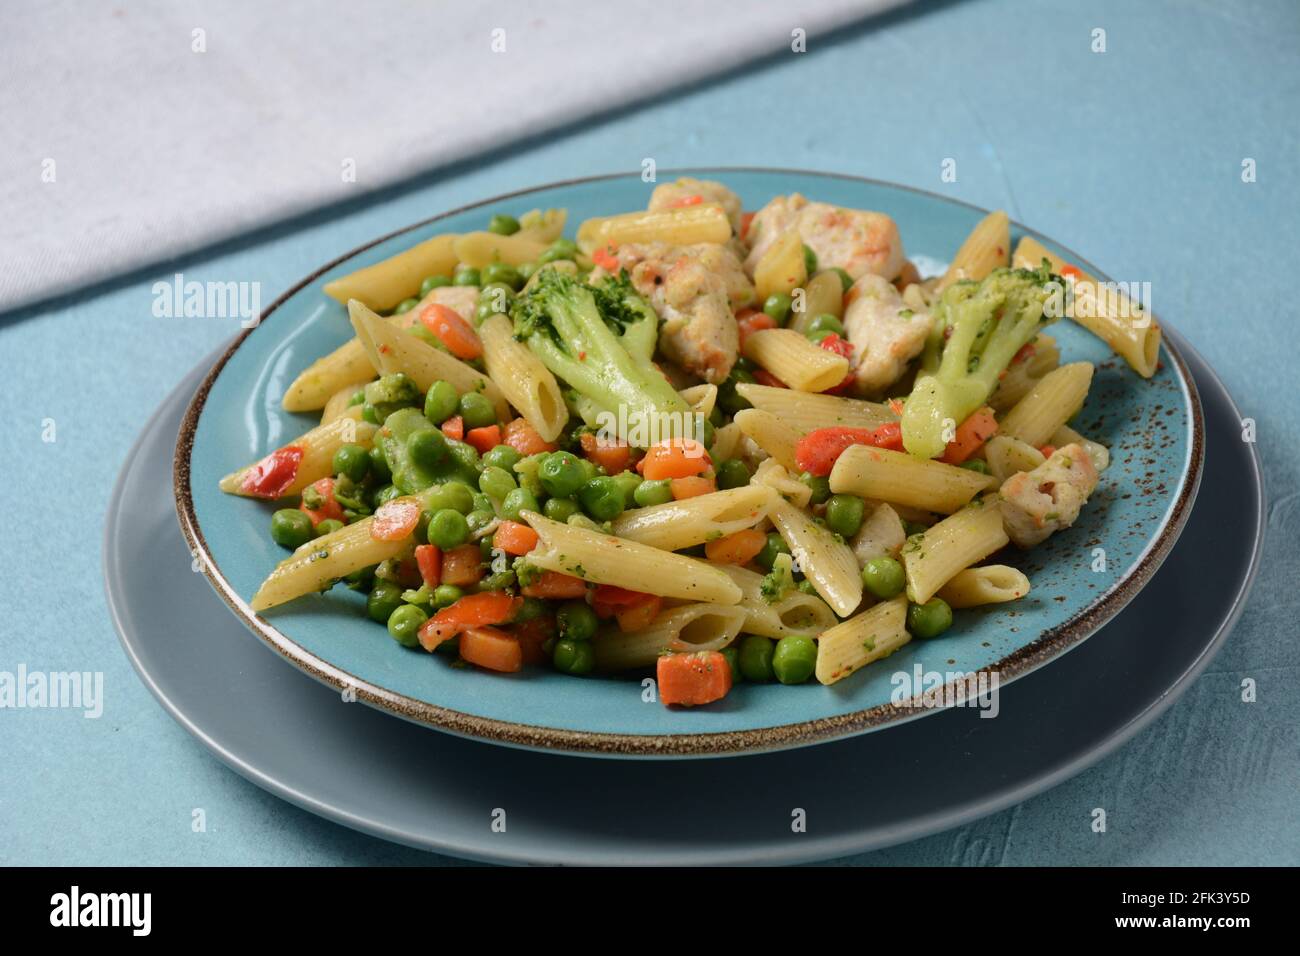 Pasta salad with baked vegetables and fried pieces of chicken breast . Penne pasta with broccoli, beans and carrots. Stock Photo